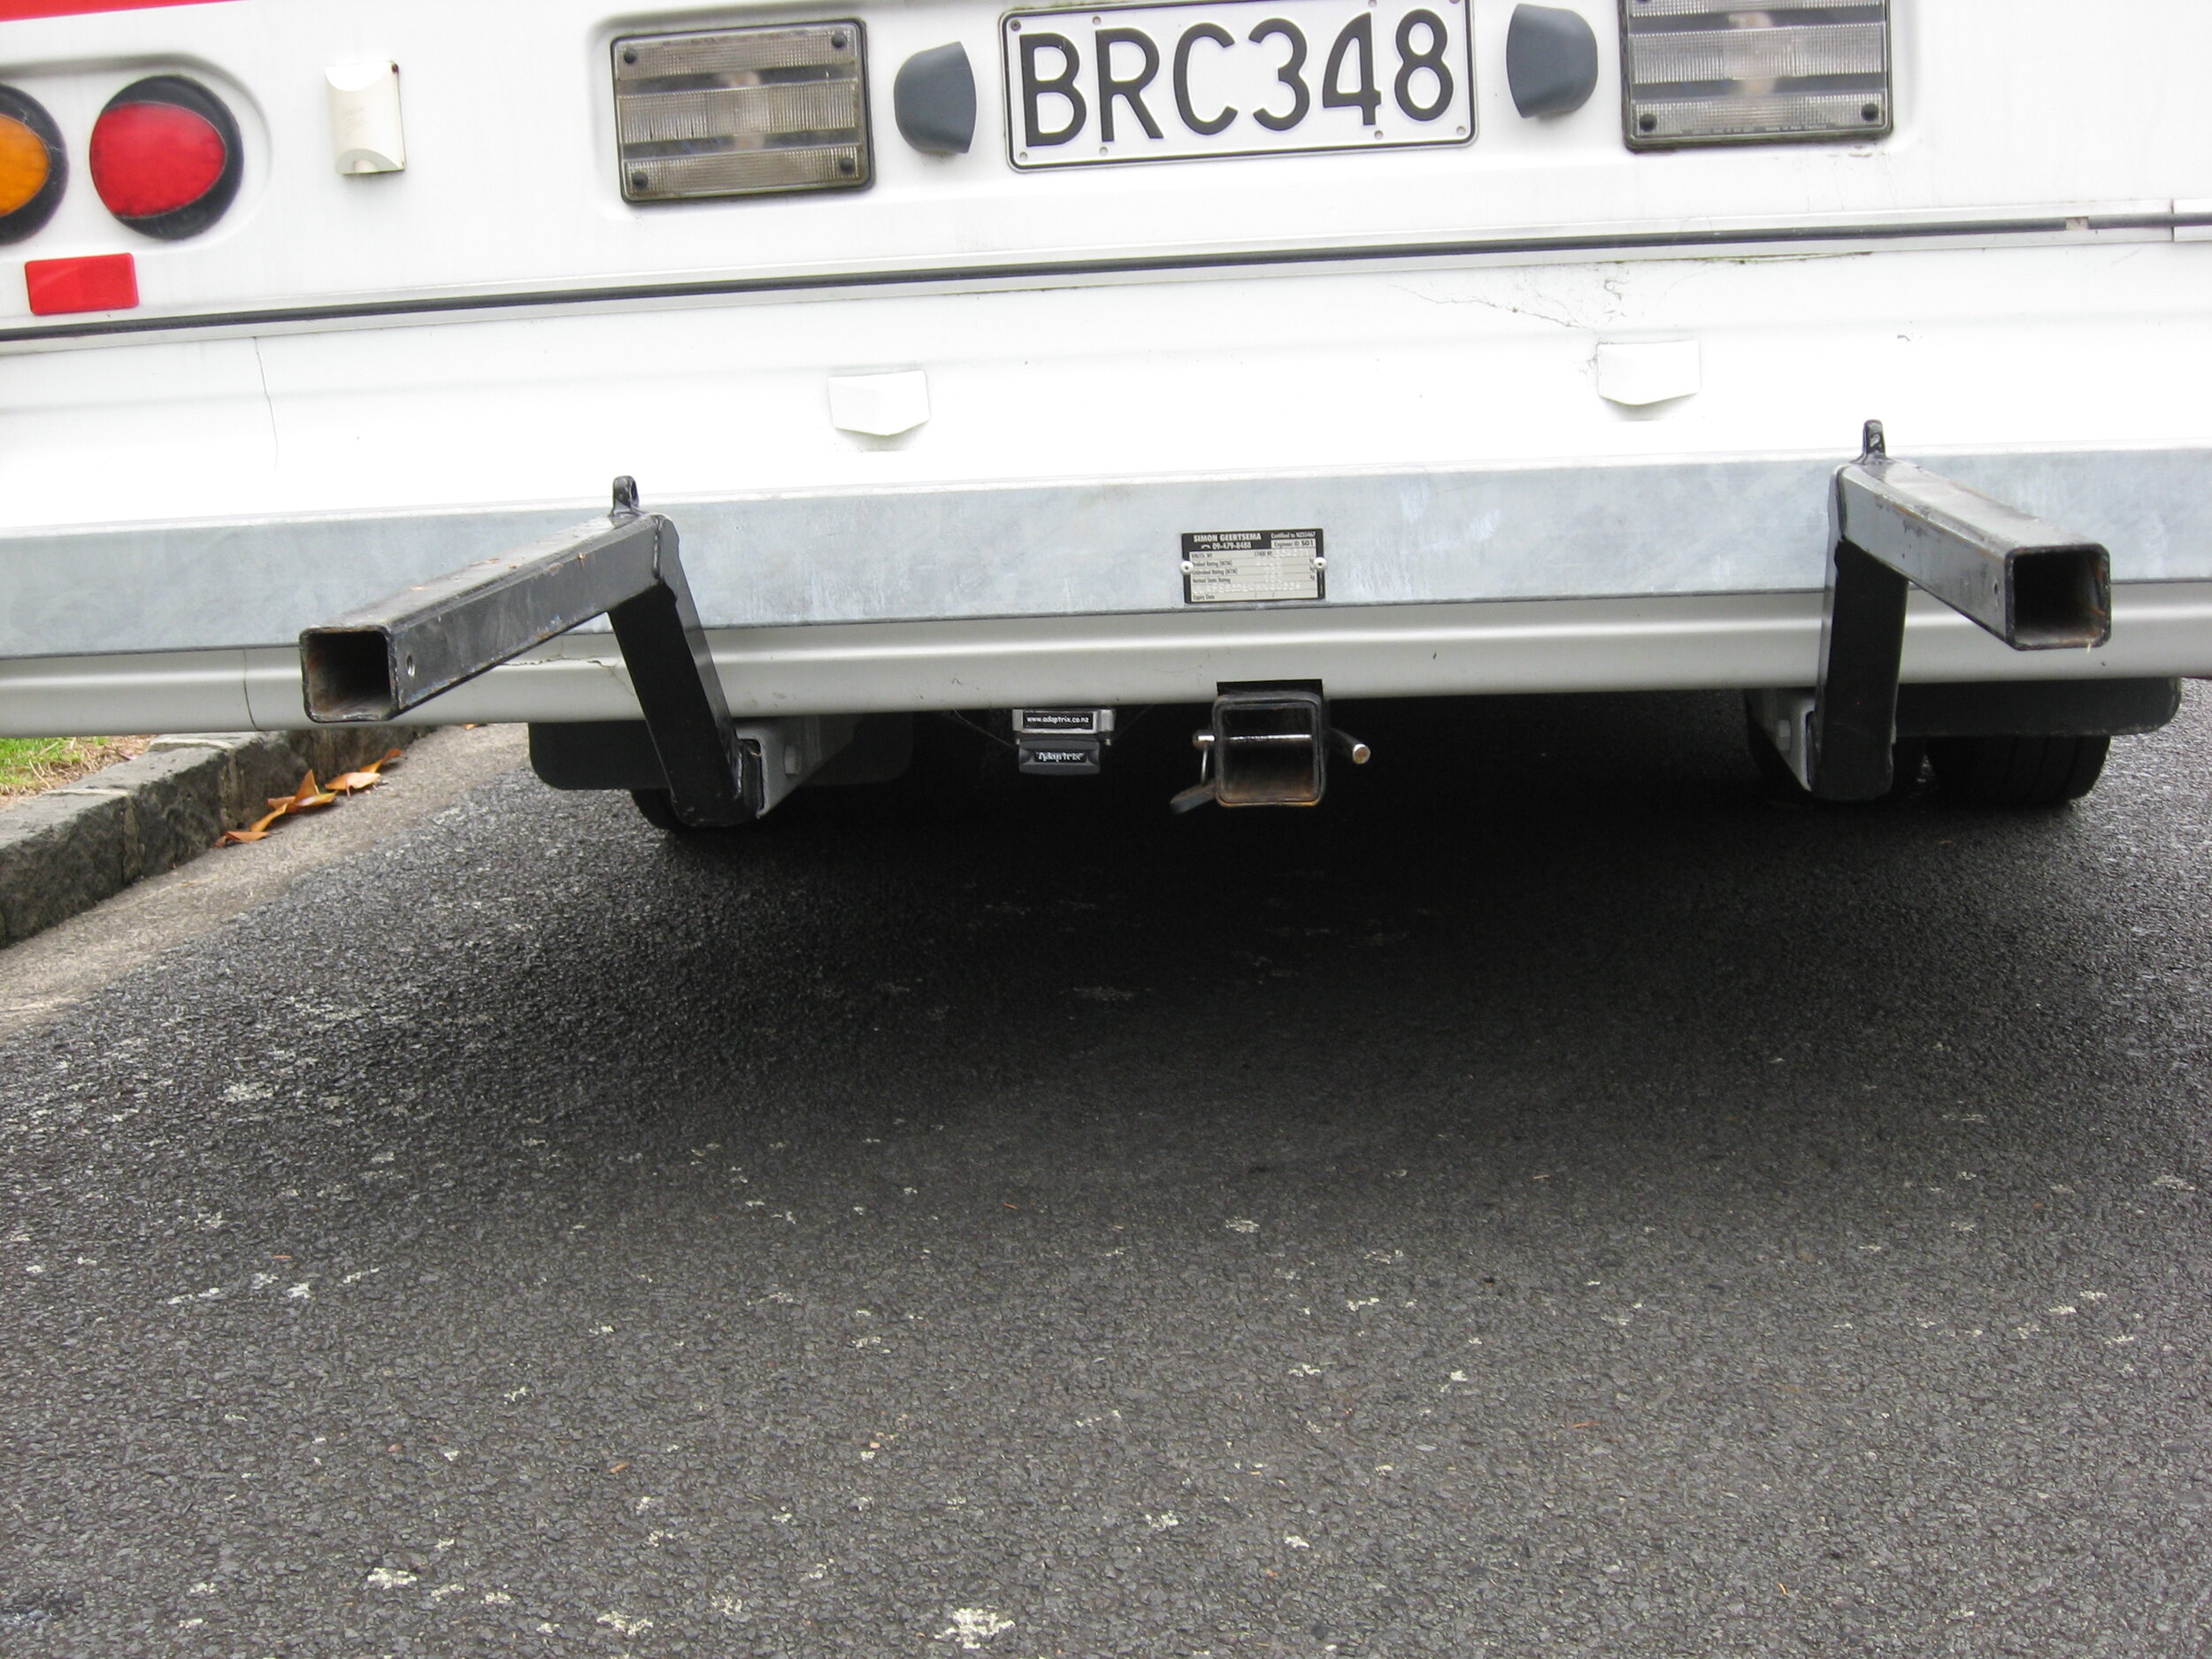 Carrier arms slot into towbar assembly